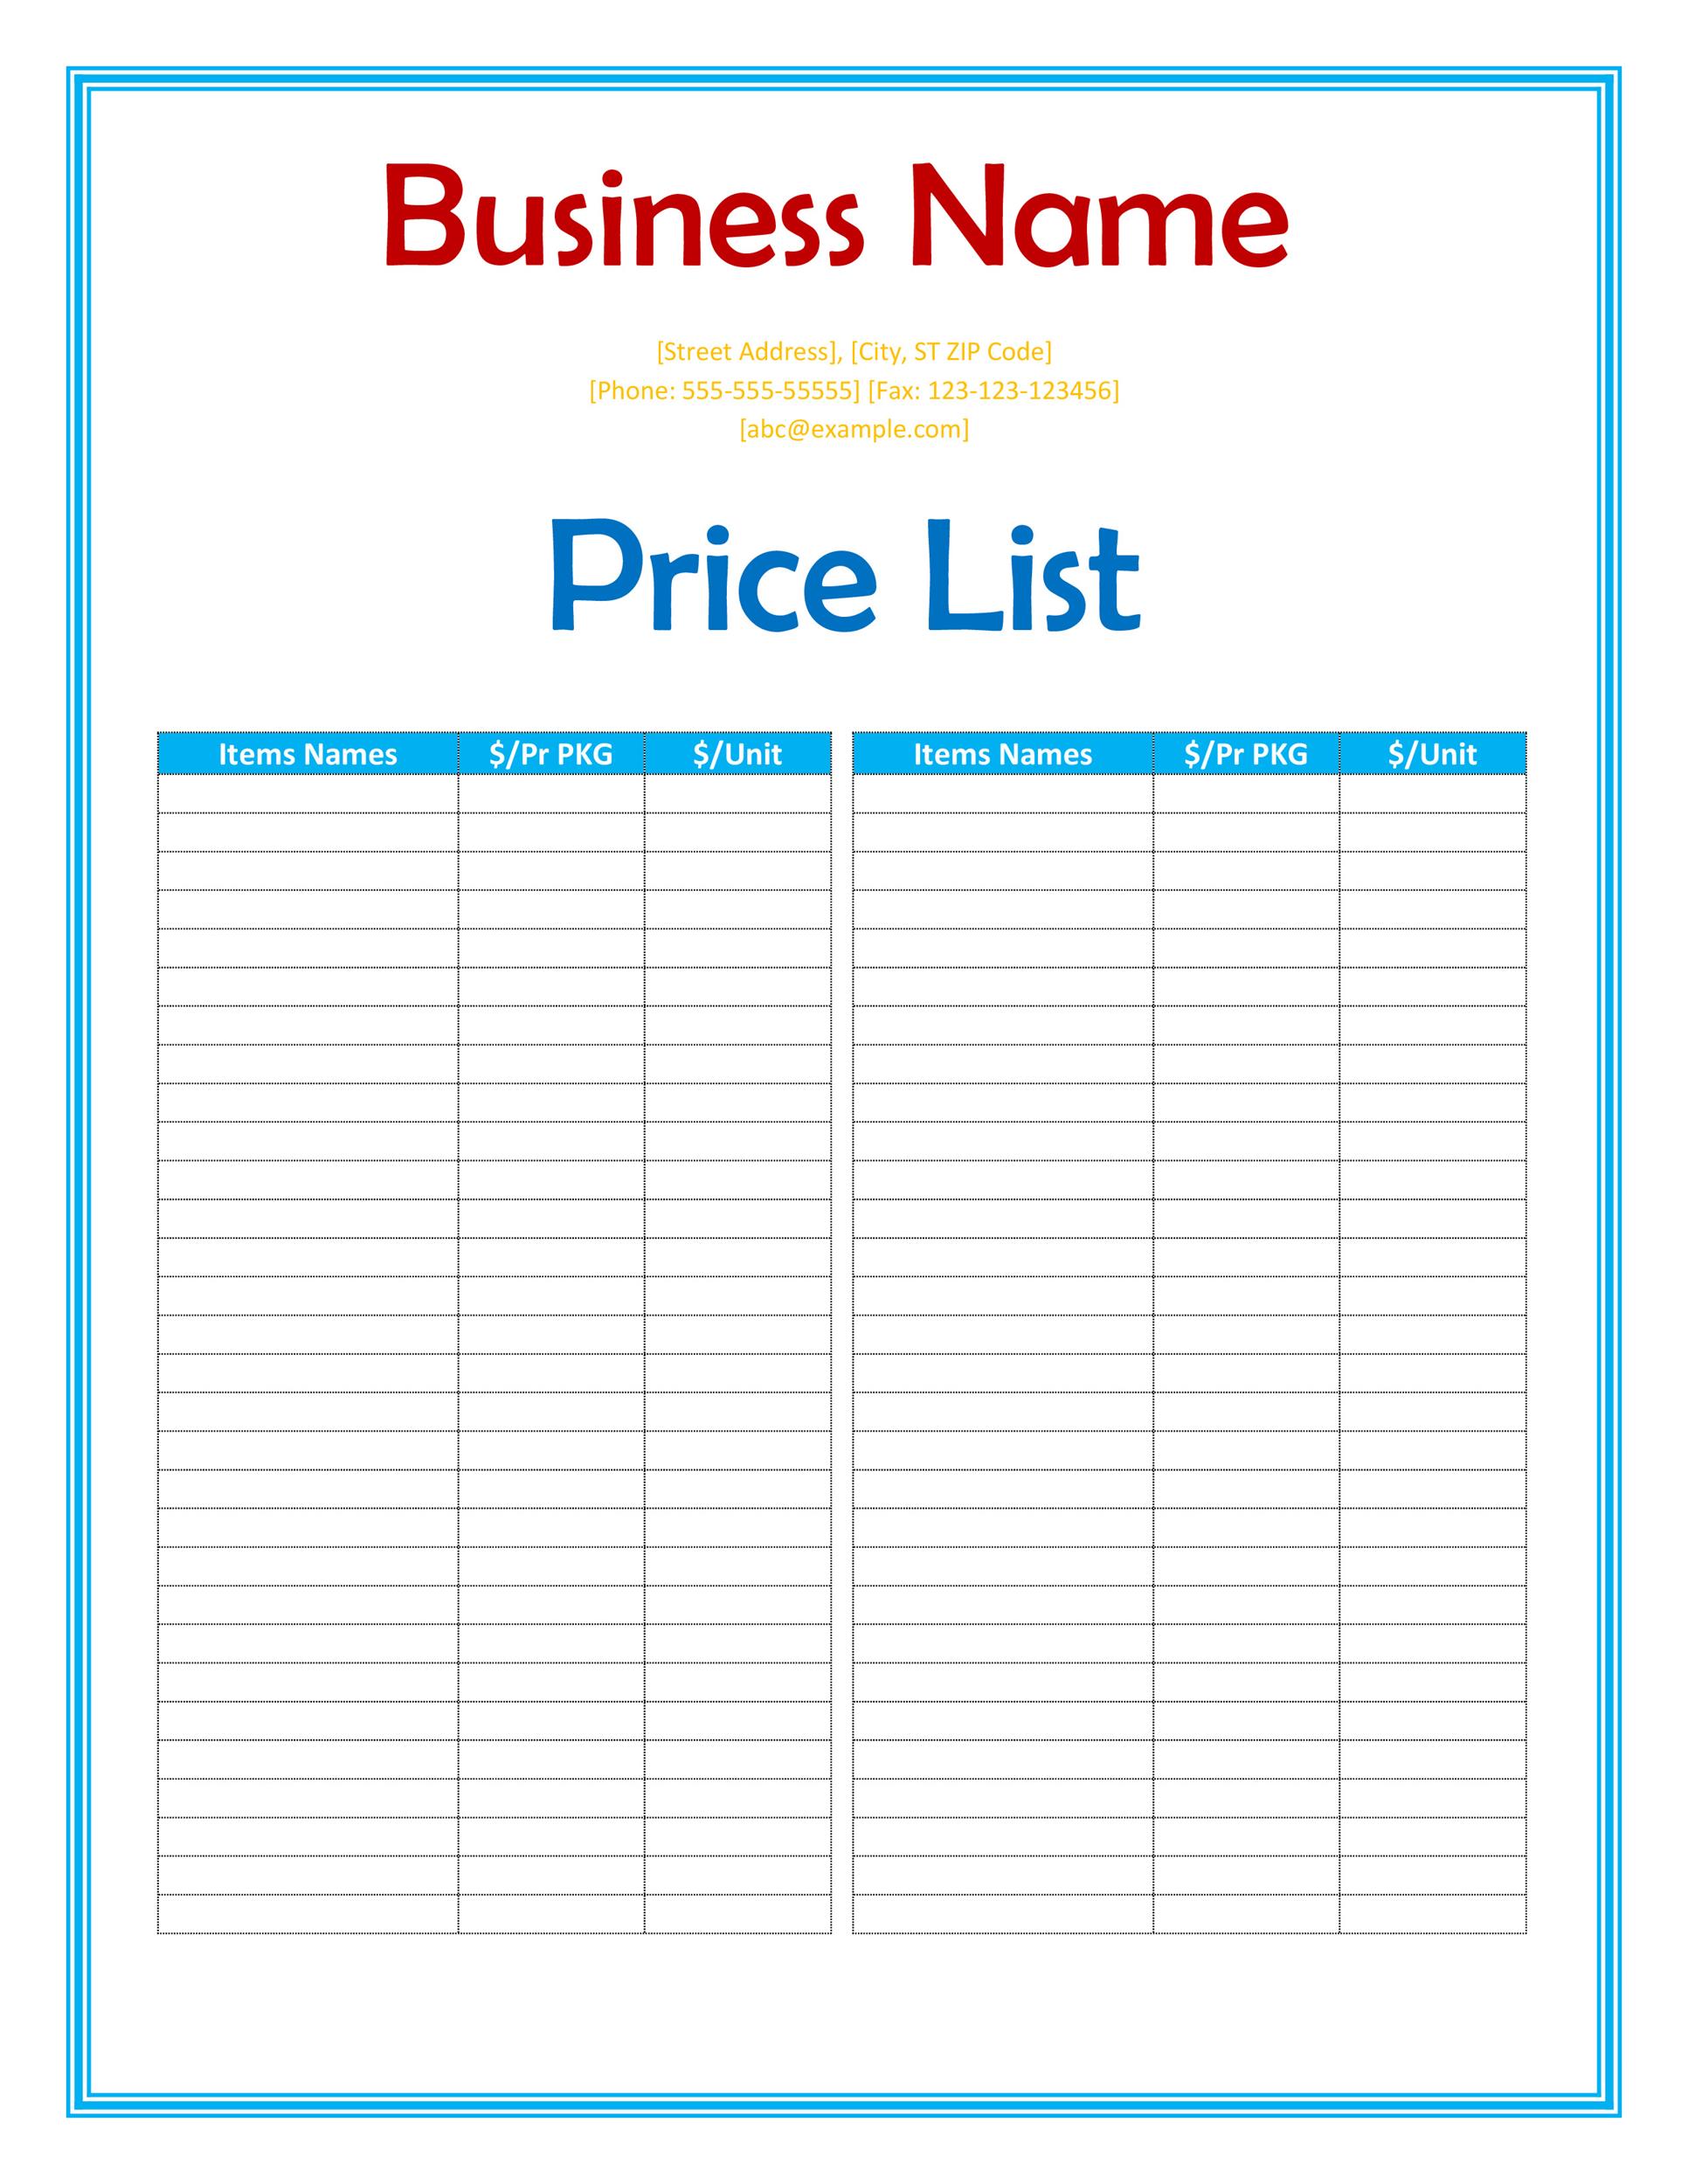 Free Price List Design Template Excel from templatelab.com